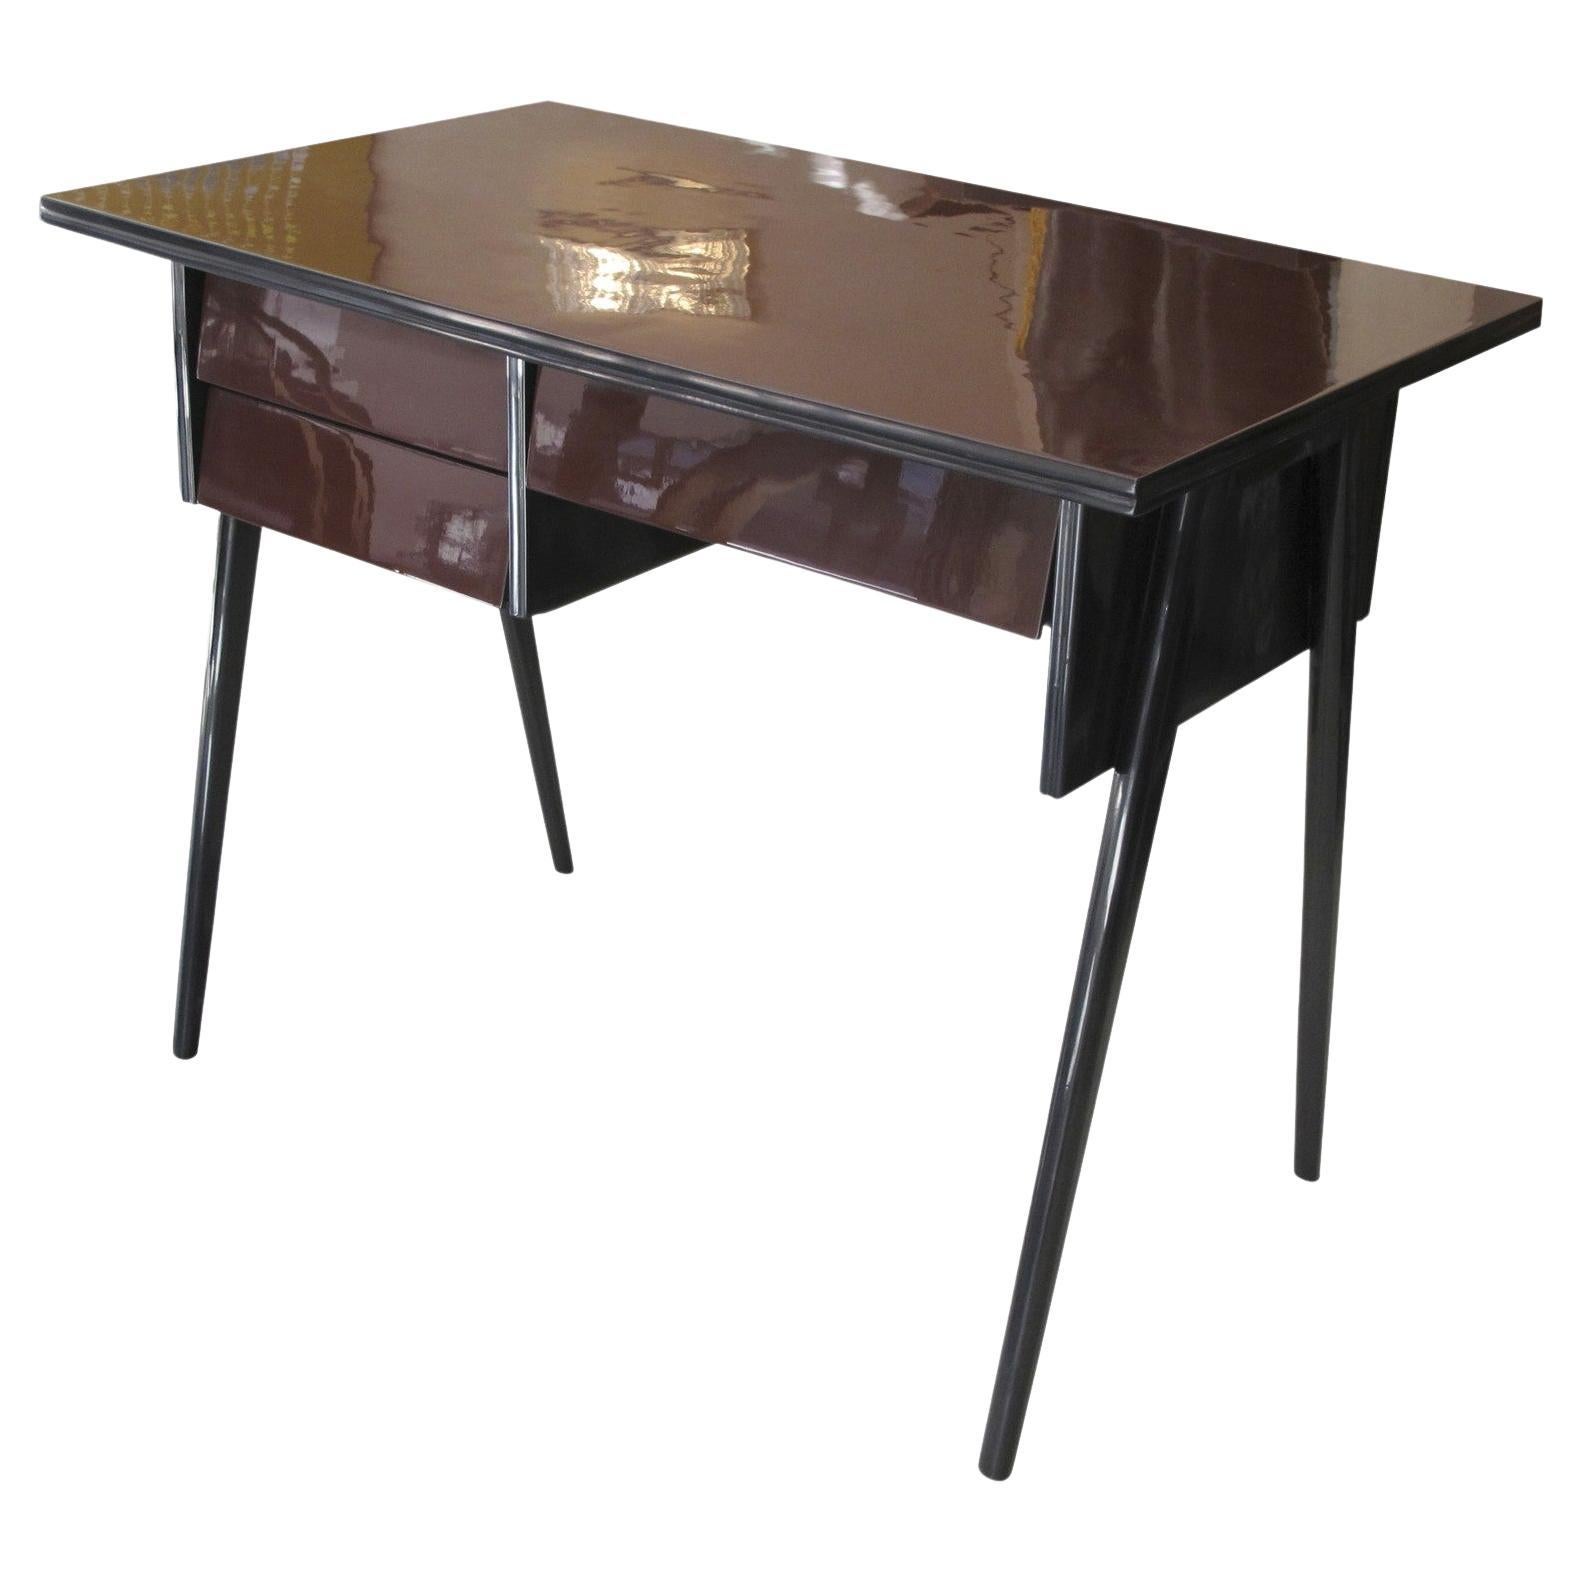 Italian Desk from the 60s For Sale